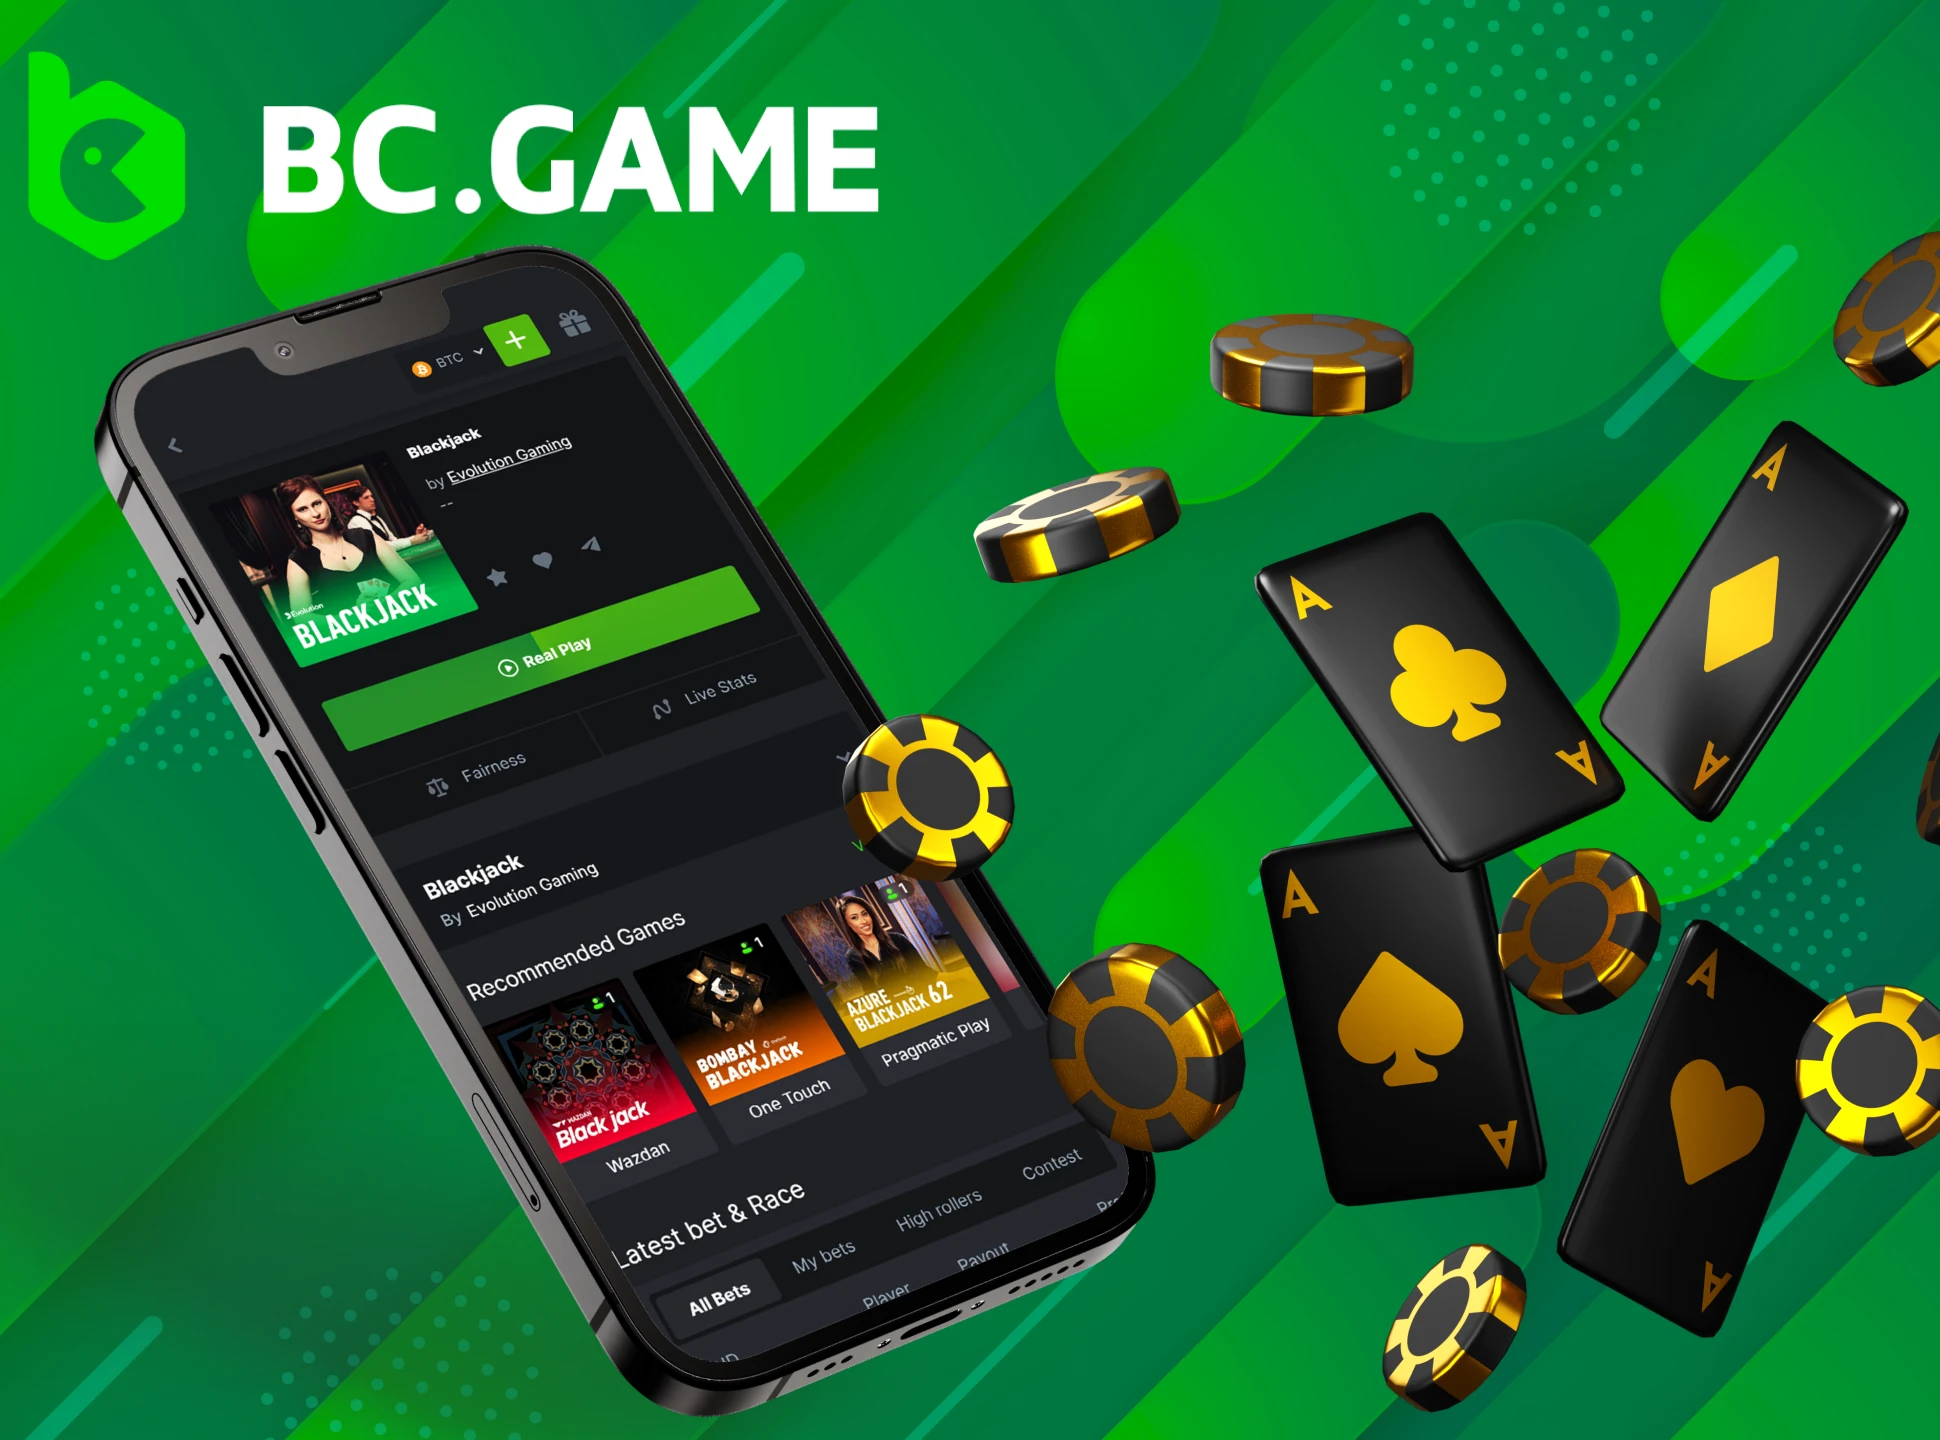 In the BC Game app you will find a variety of Live Blackjack games.